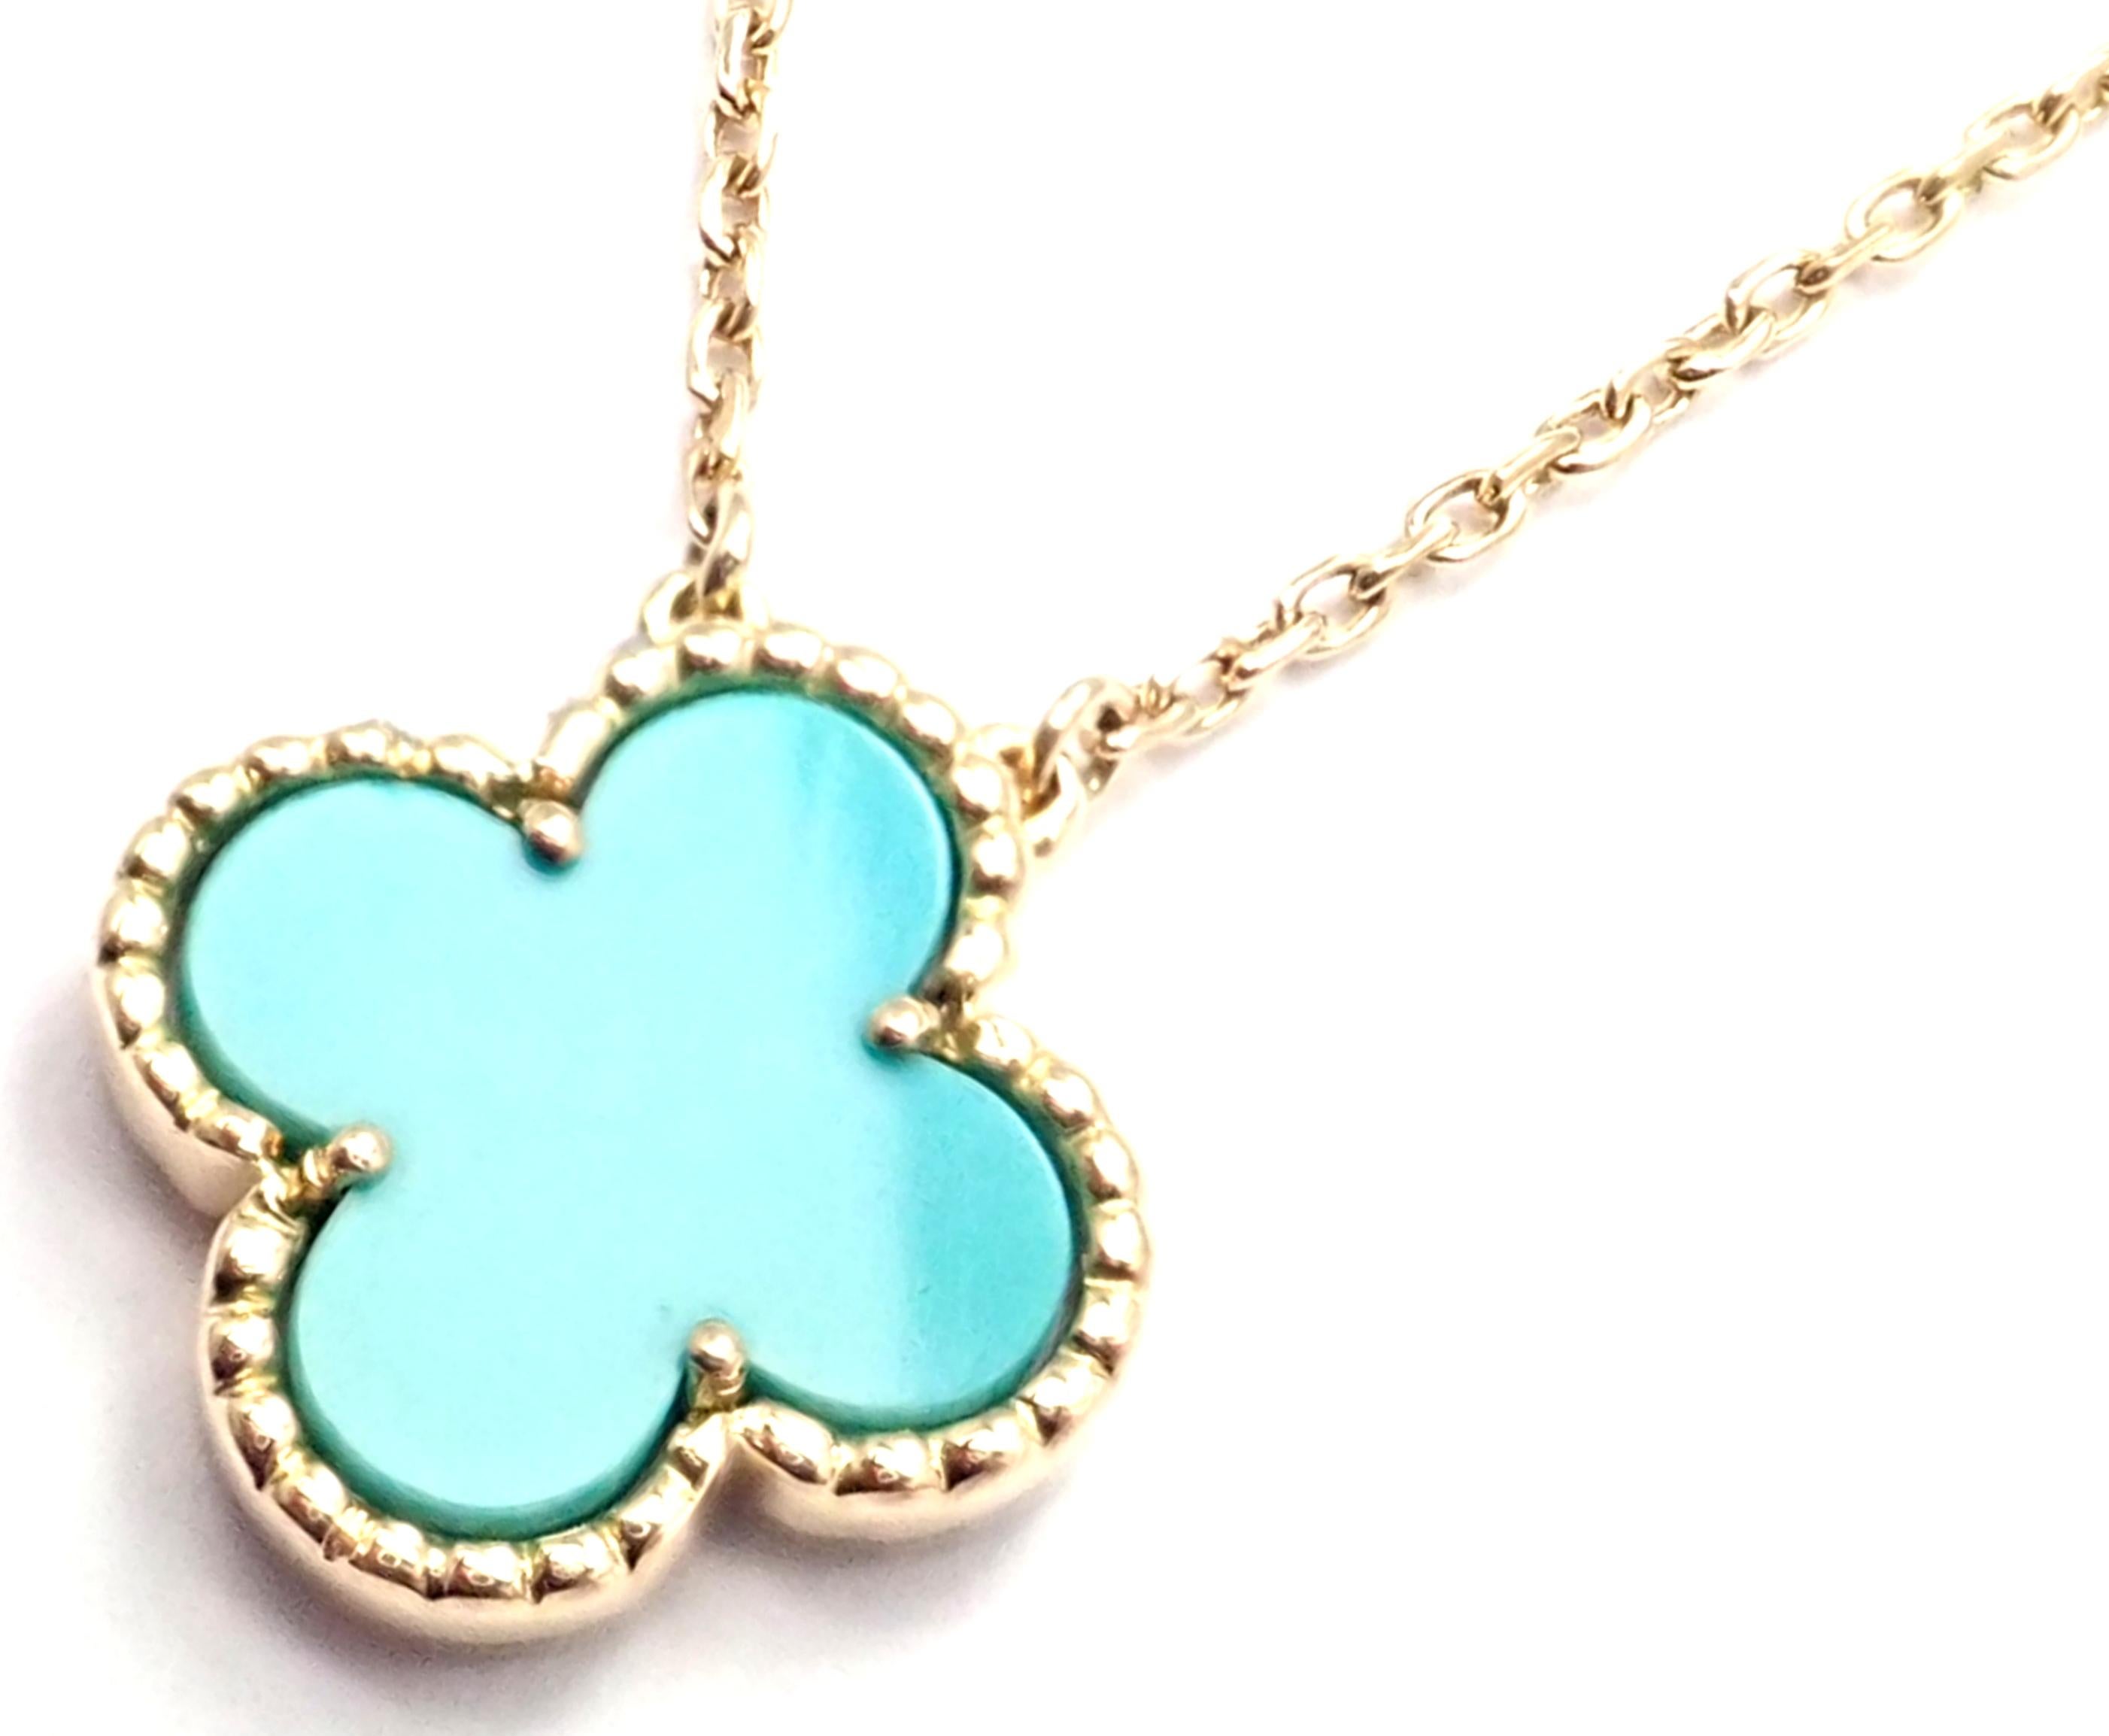 18k Yellow Gold Vintage Alhambra Turquoise Pendant Necklace by Van Cleef & Arpels. 
With one 15mm motif of turquoise alhambra stone.
Details: 
Length: 20